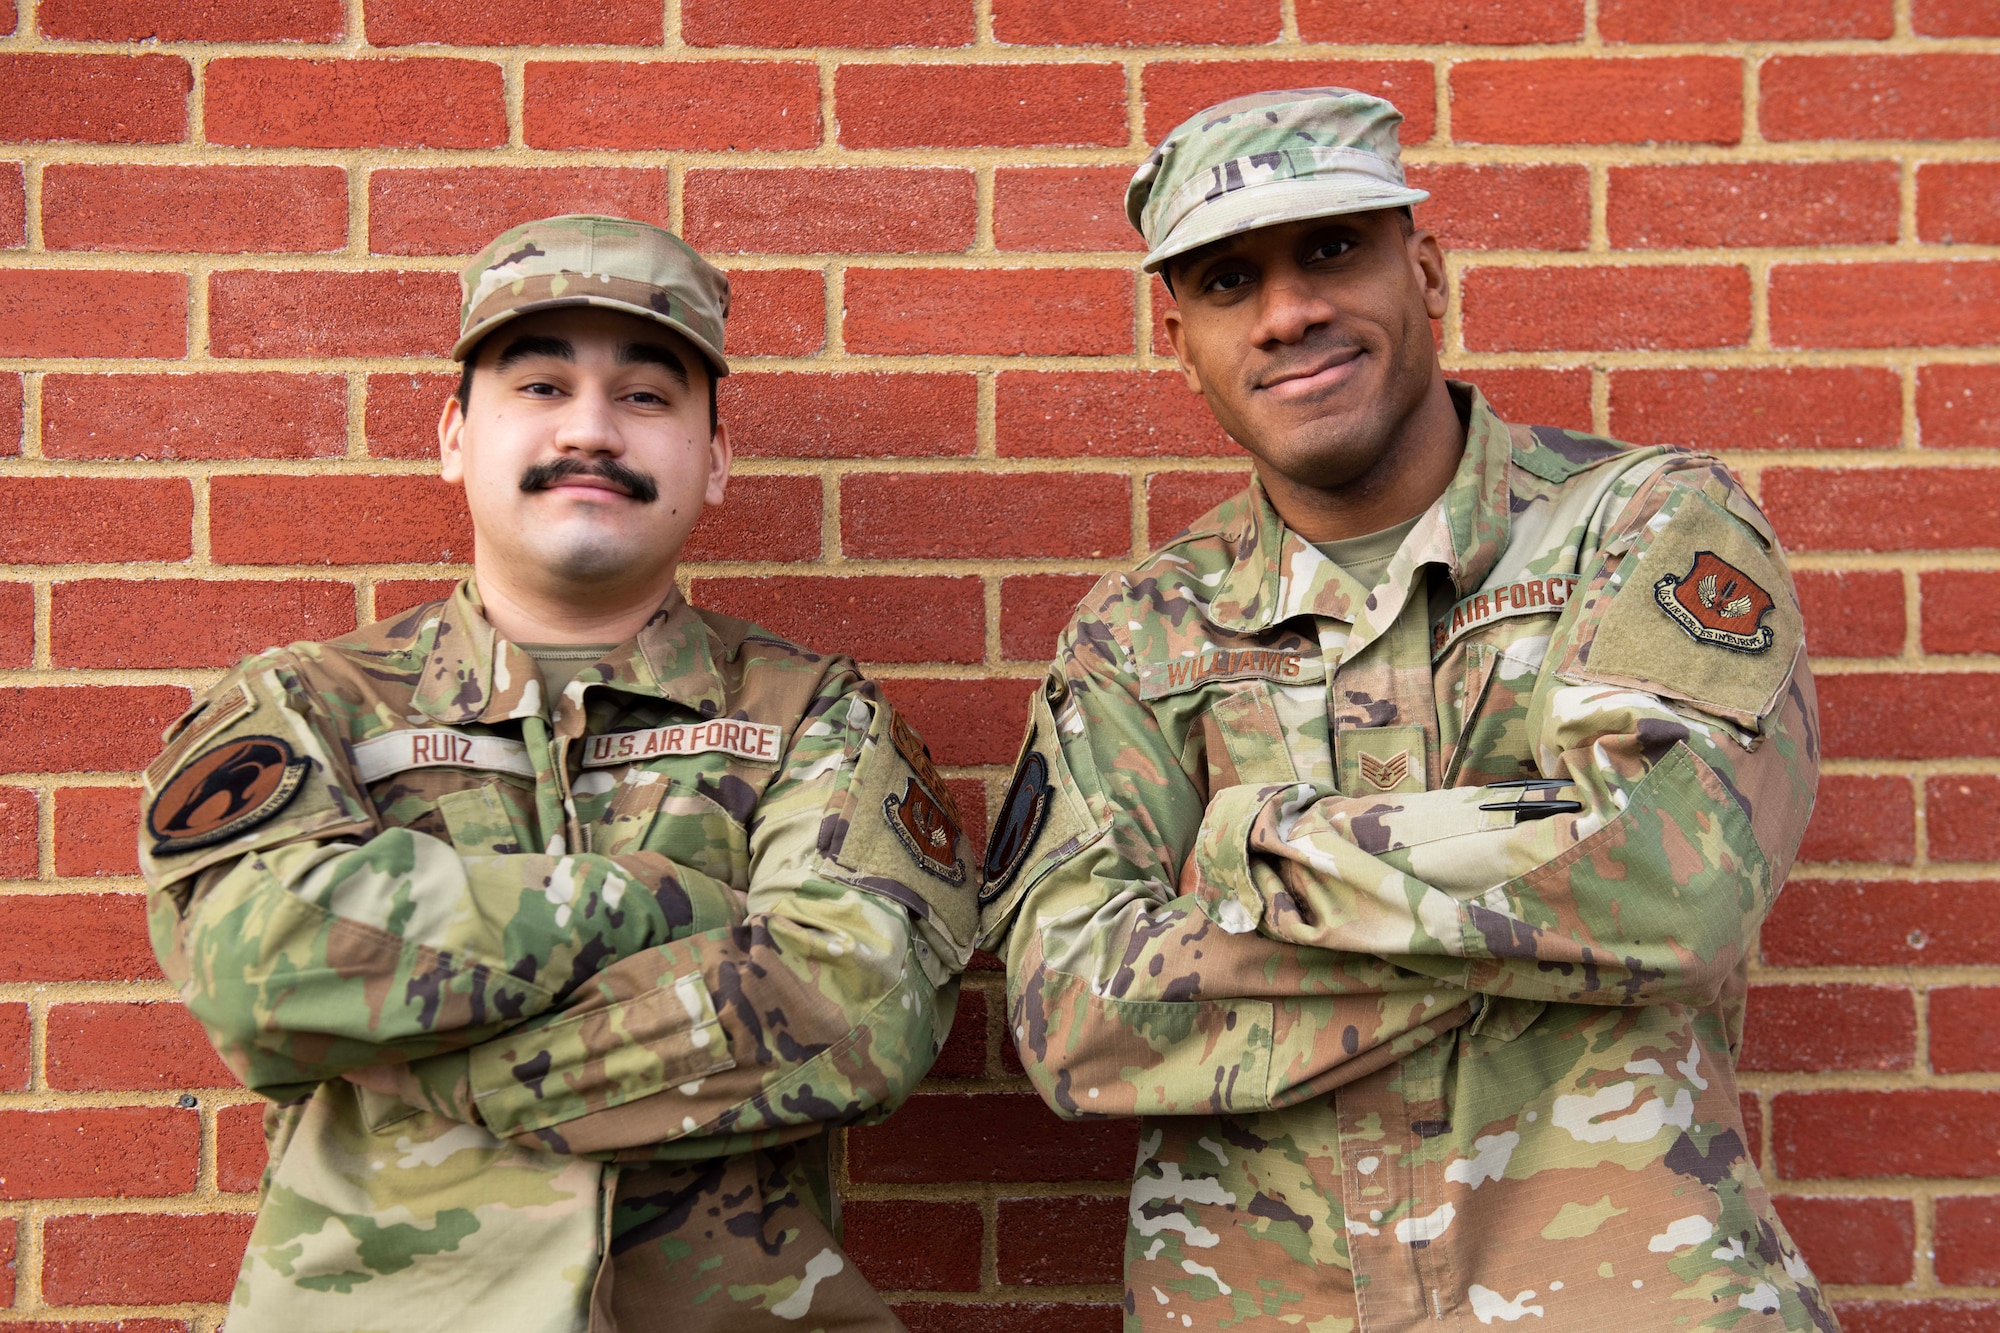 U.S. Air Force Airman 1st Class Francisco Ruiz, left, 423rd Communications Squadron client systems technician, and Staff Sgt. Reginald Williams, right, 423rd CS base equipment custodian officer, pose for a photo at RAF Alconbury, England, Jan. 5, 2024. Ruiz and Williams shared their thought on what Martin Luther King Jr. means to them. (U.S. Air Force photo by Staff Sgt. Jennifer Zima)